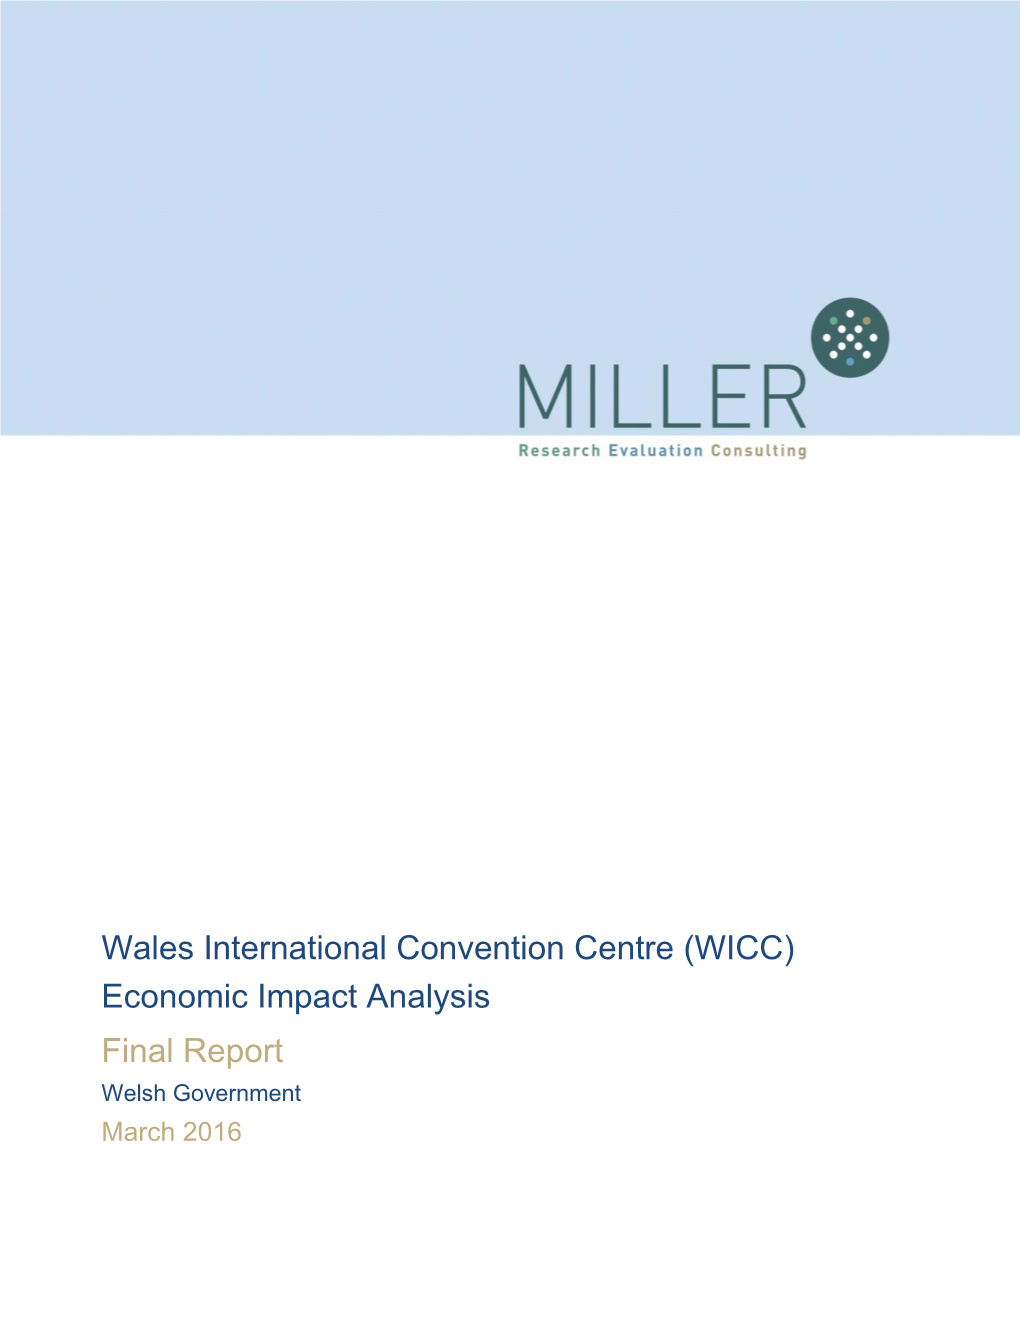 Wales International Convention Centre (WICC) Economic Impact Analysis Final Report Welsh Government March 2016